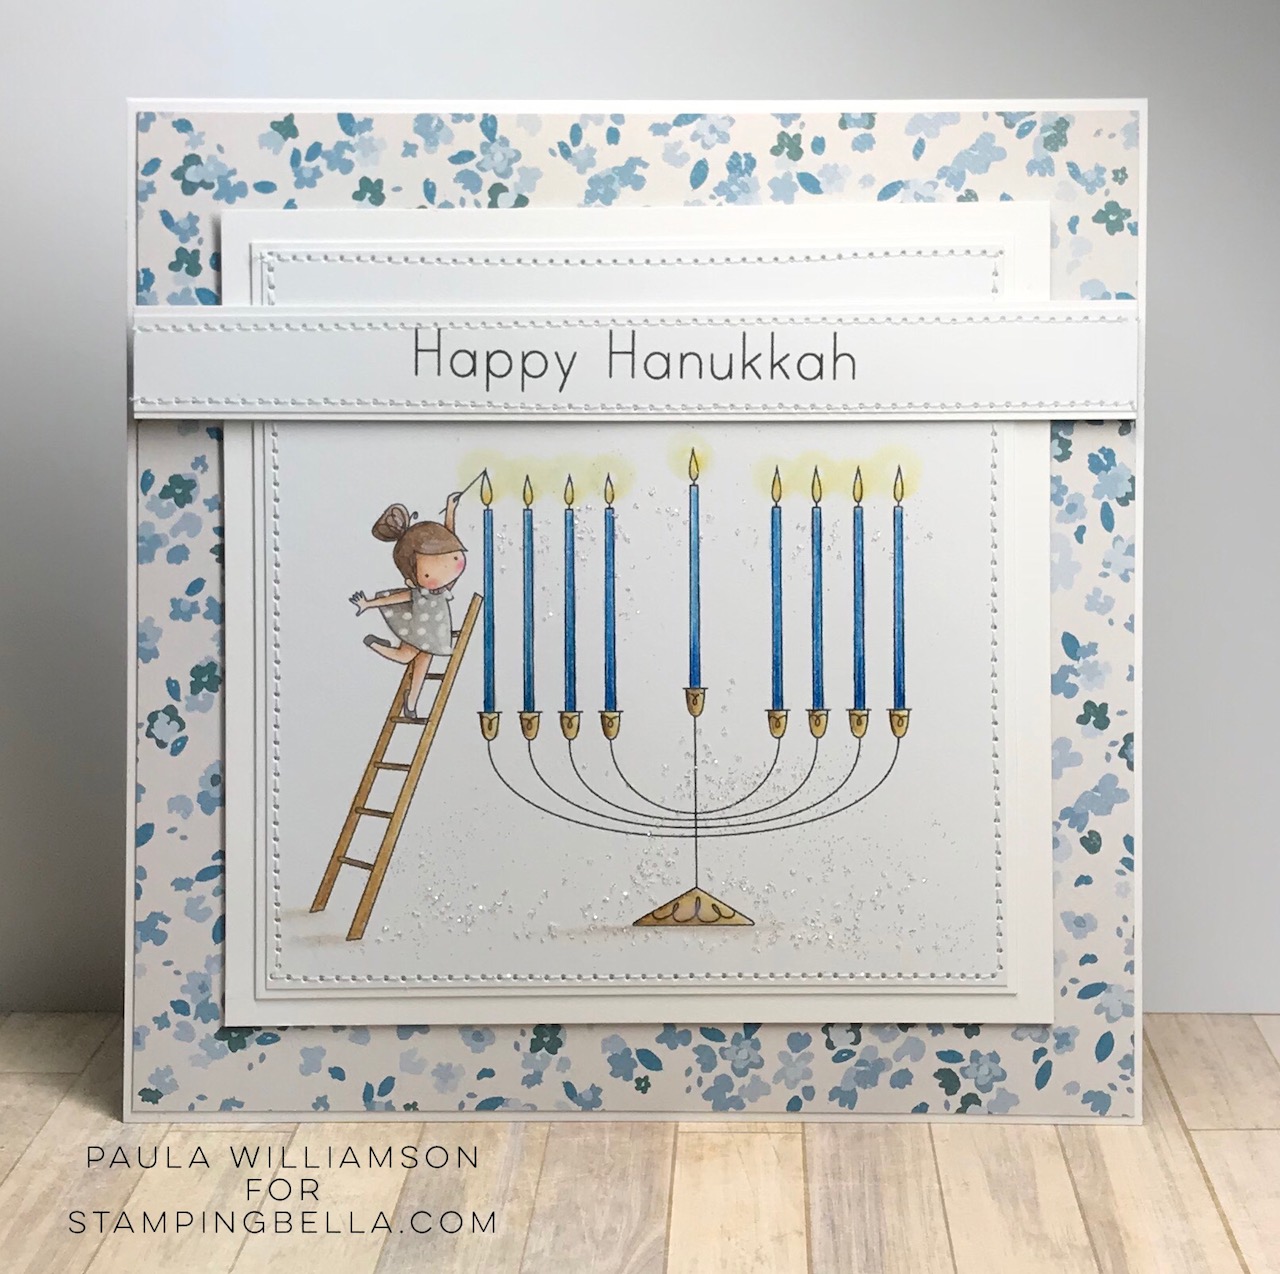 www.stampingbella.com: rubber stamp used TEENY TINY TOWNIE CHANUKAH card by PAULA WILLIAMSON